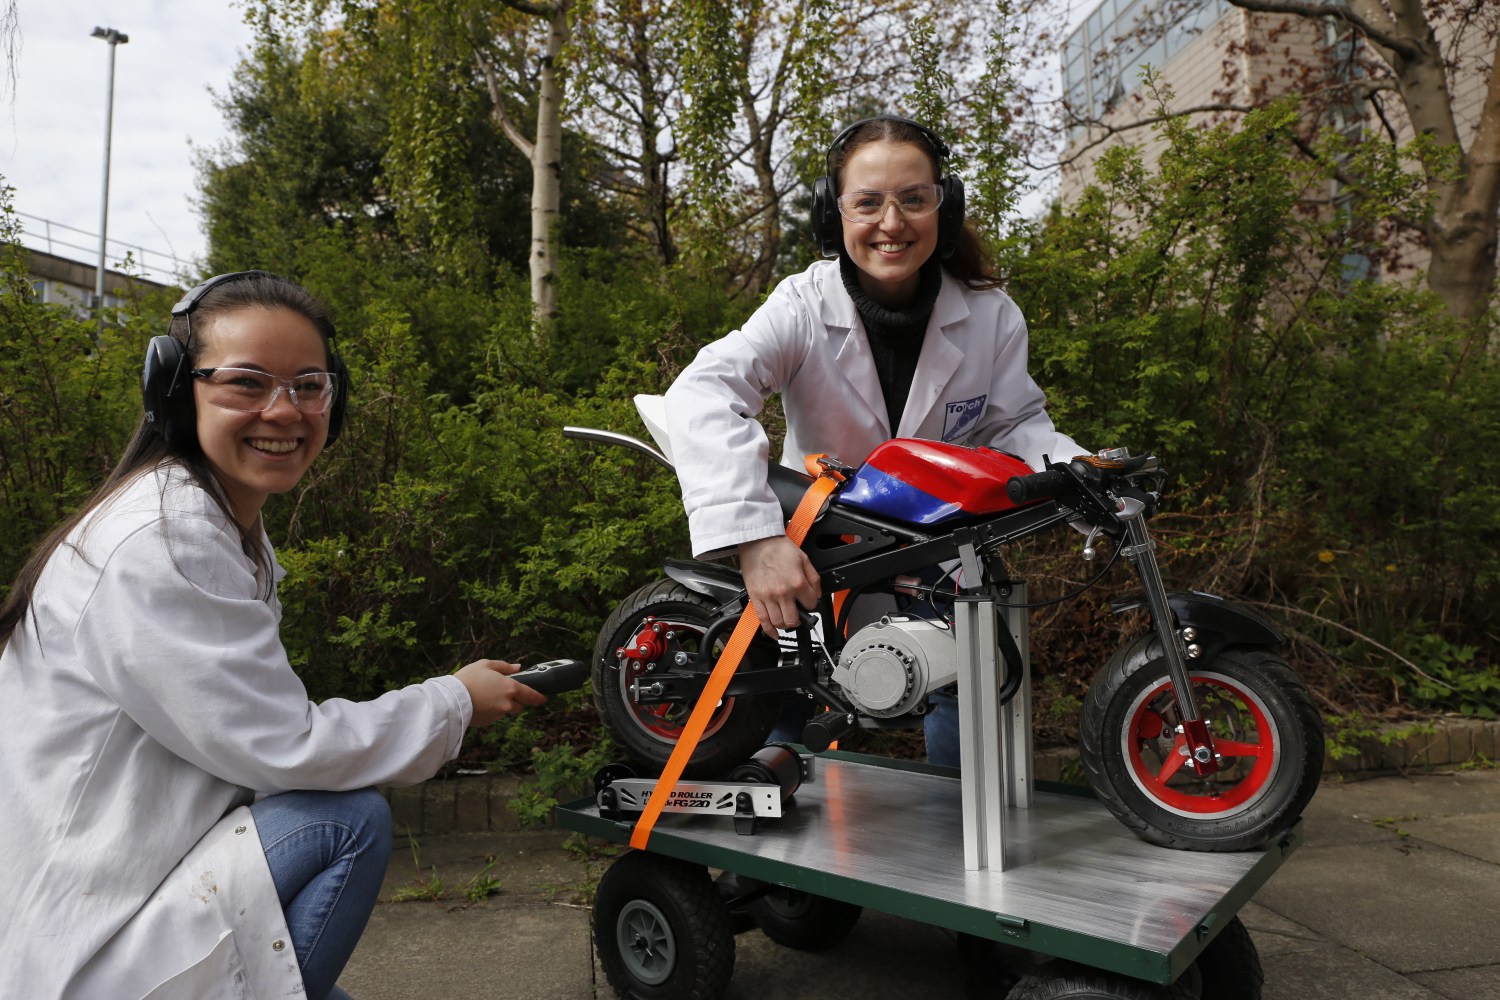 Primary stage in the design of an on-board carbon capture system for a mini motorbike